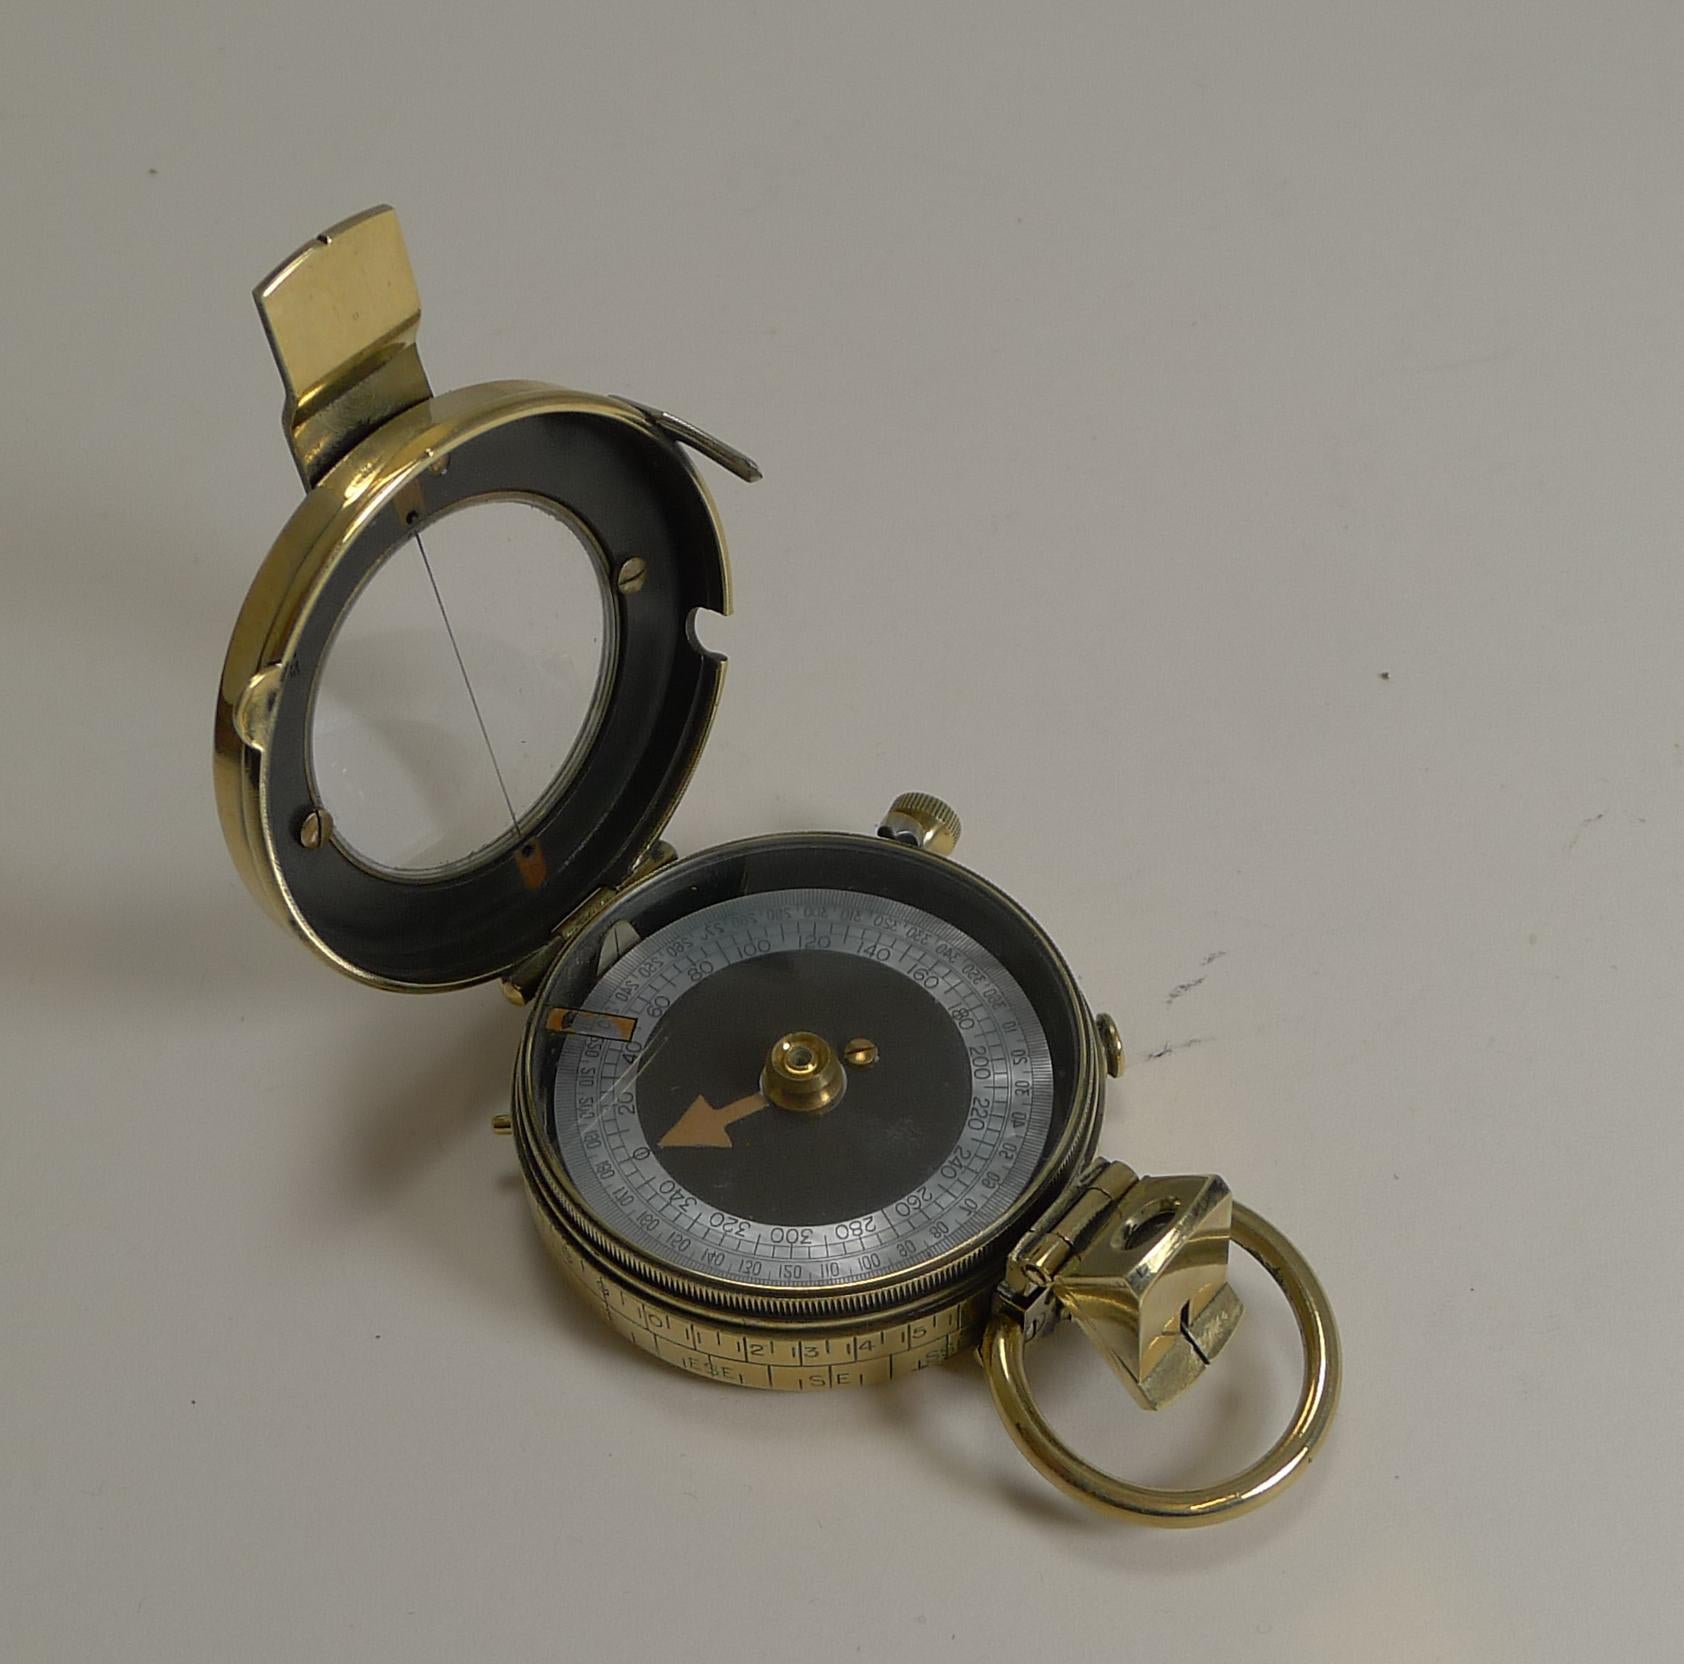 Early 20th Century WW1 1917 British Army Officer's Compass Verner's Patent MK VIII by French Ltd